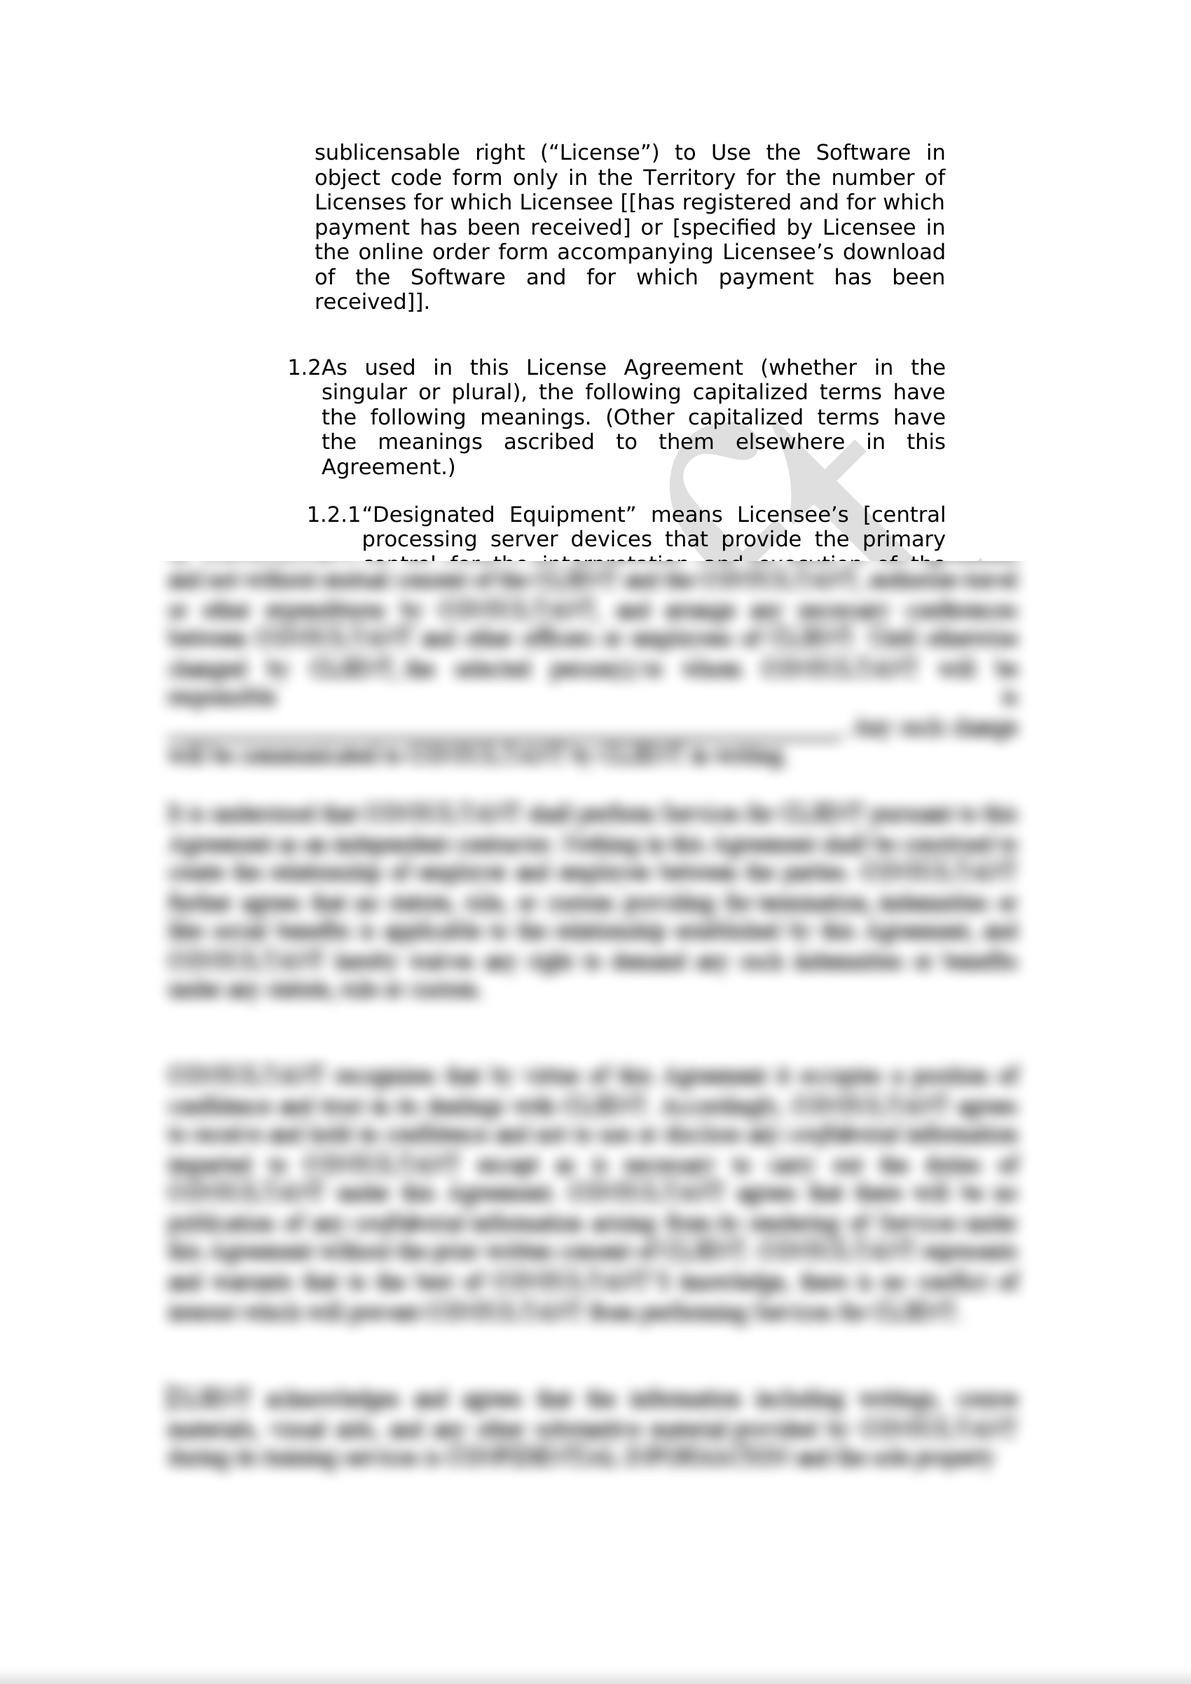 Software License Agreement-4